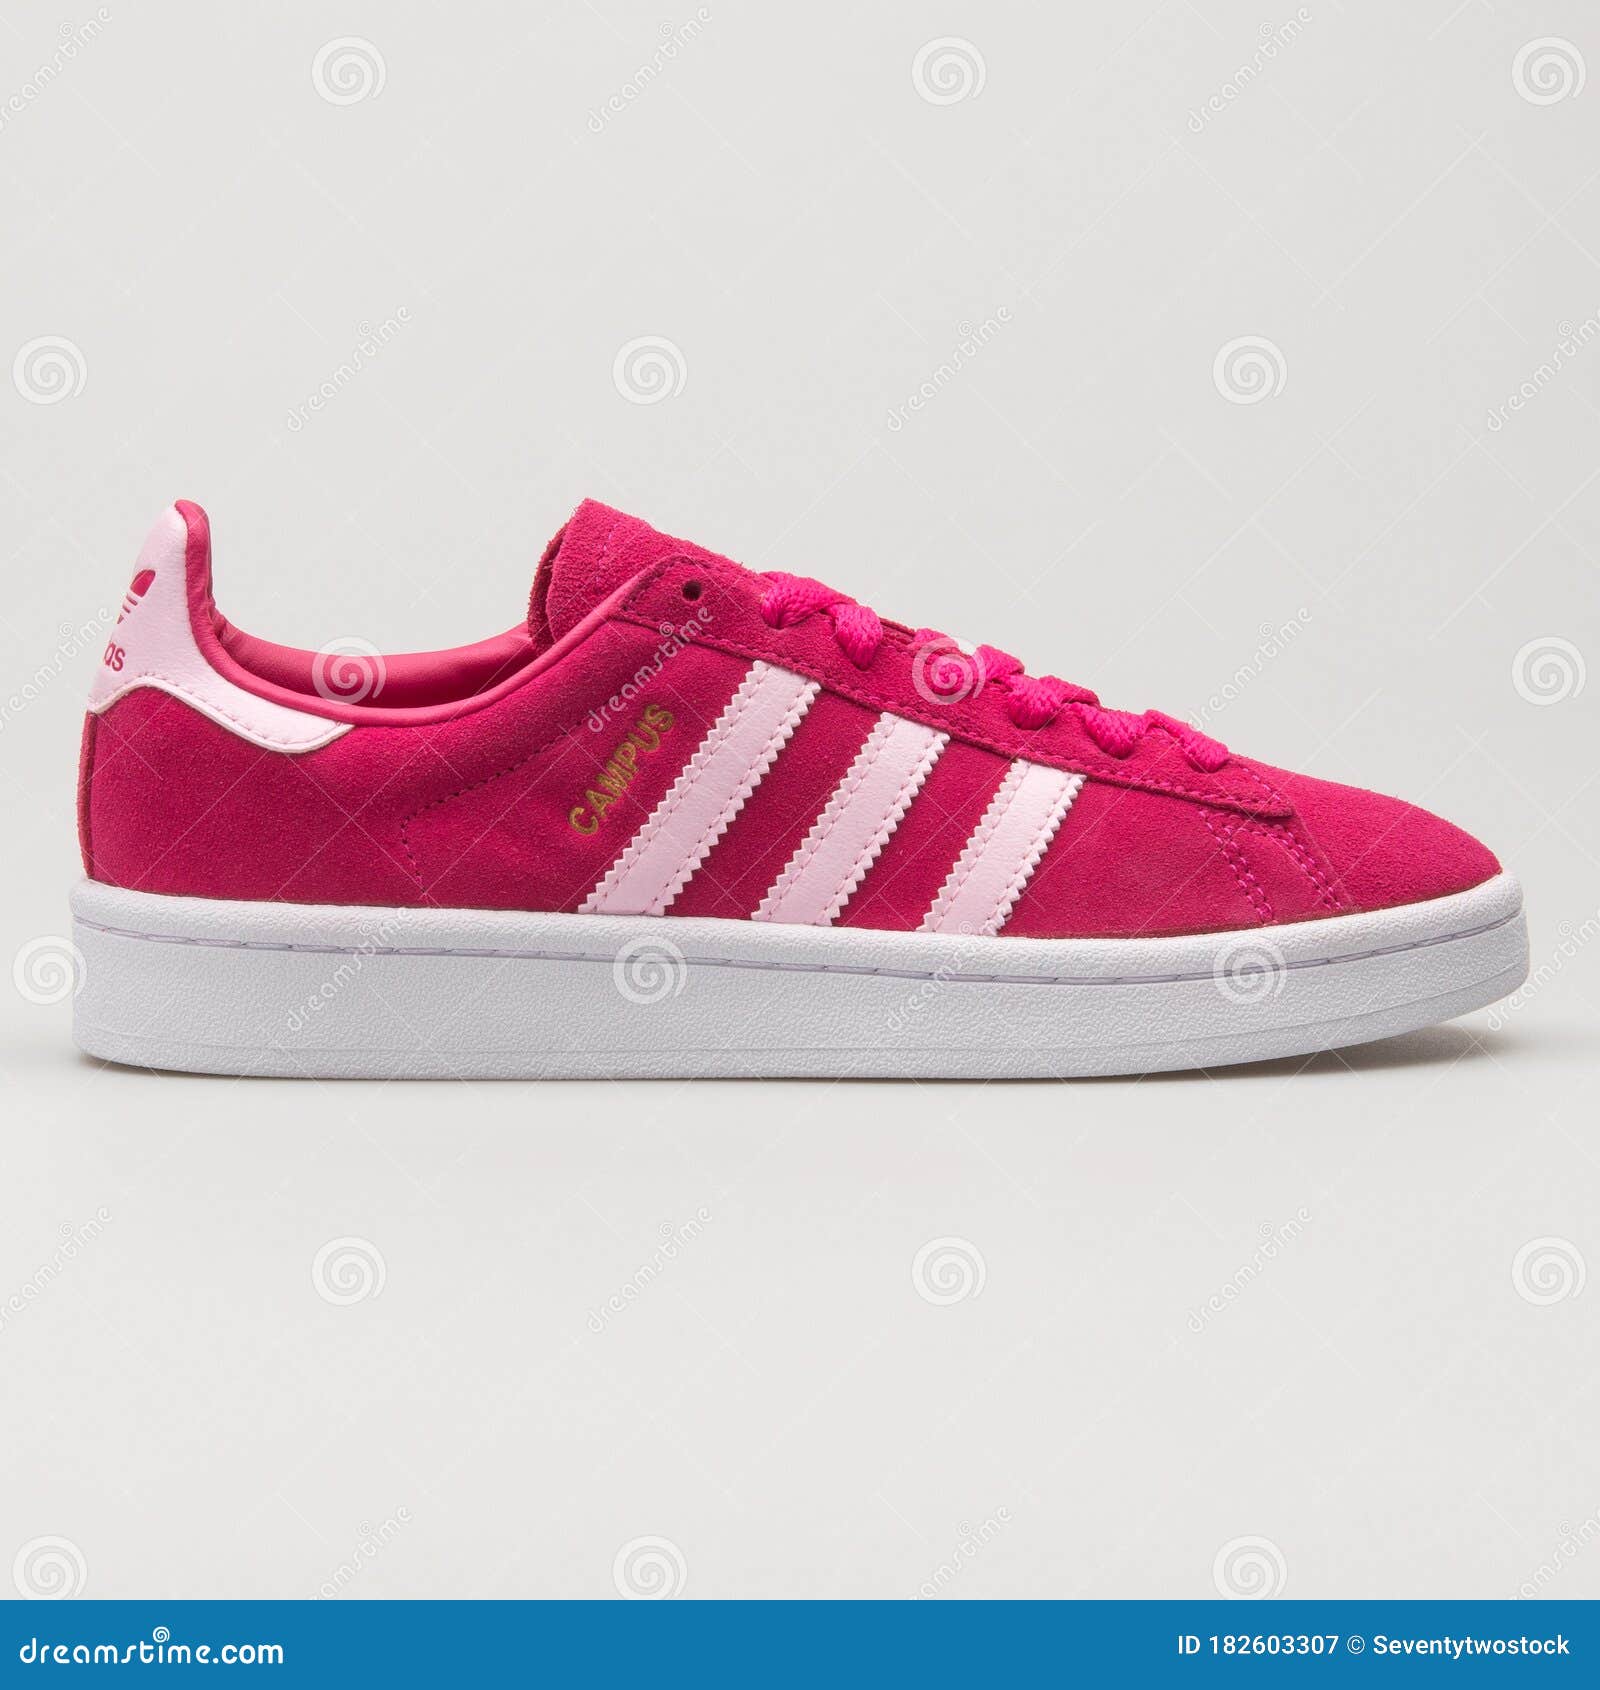 Adidas Campus Pink and White Sneaker Editorial Photography - Image of life,  side: 182603307